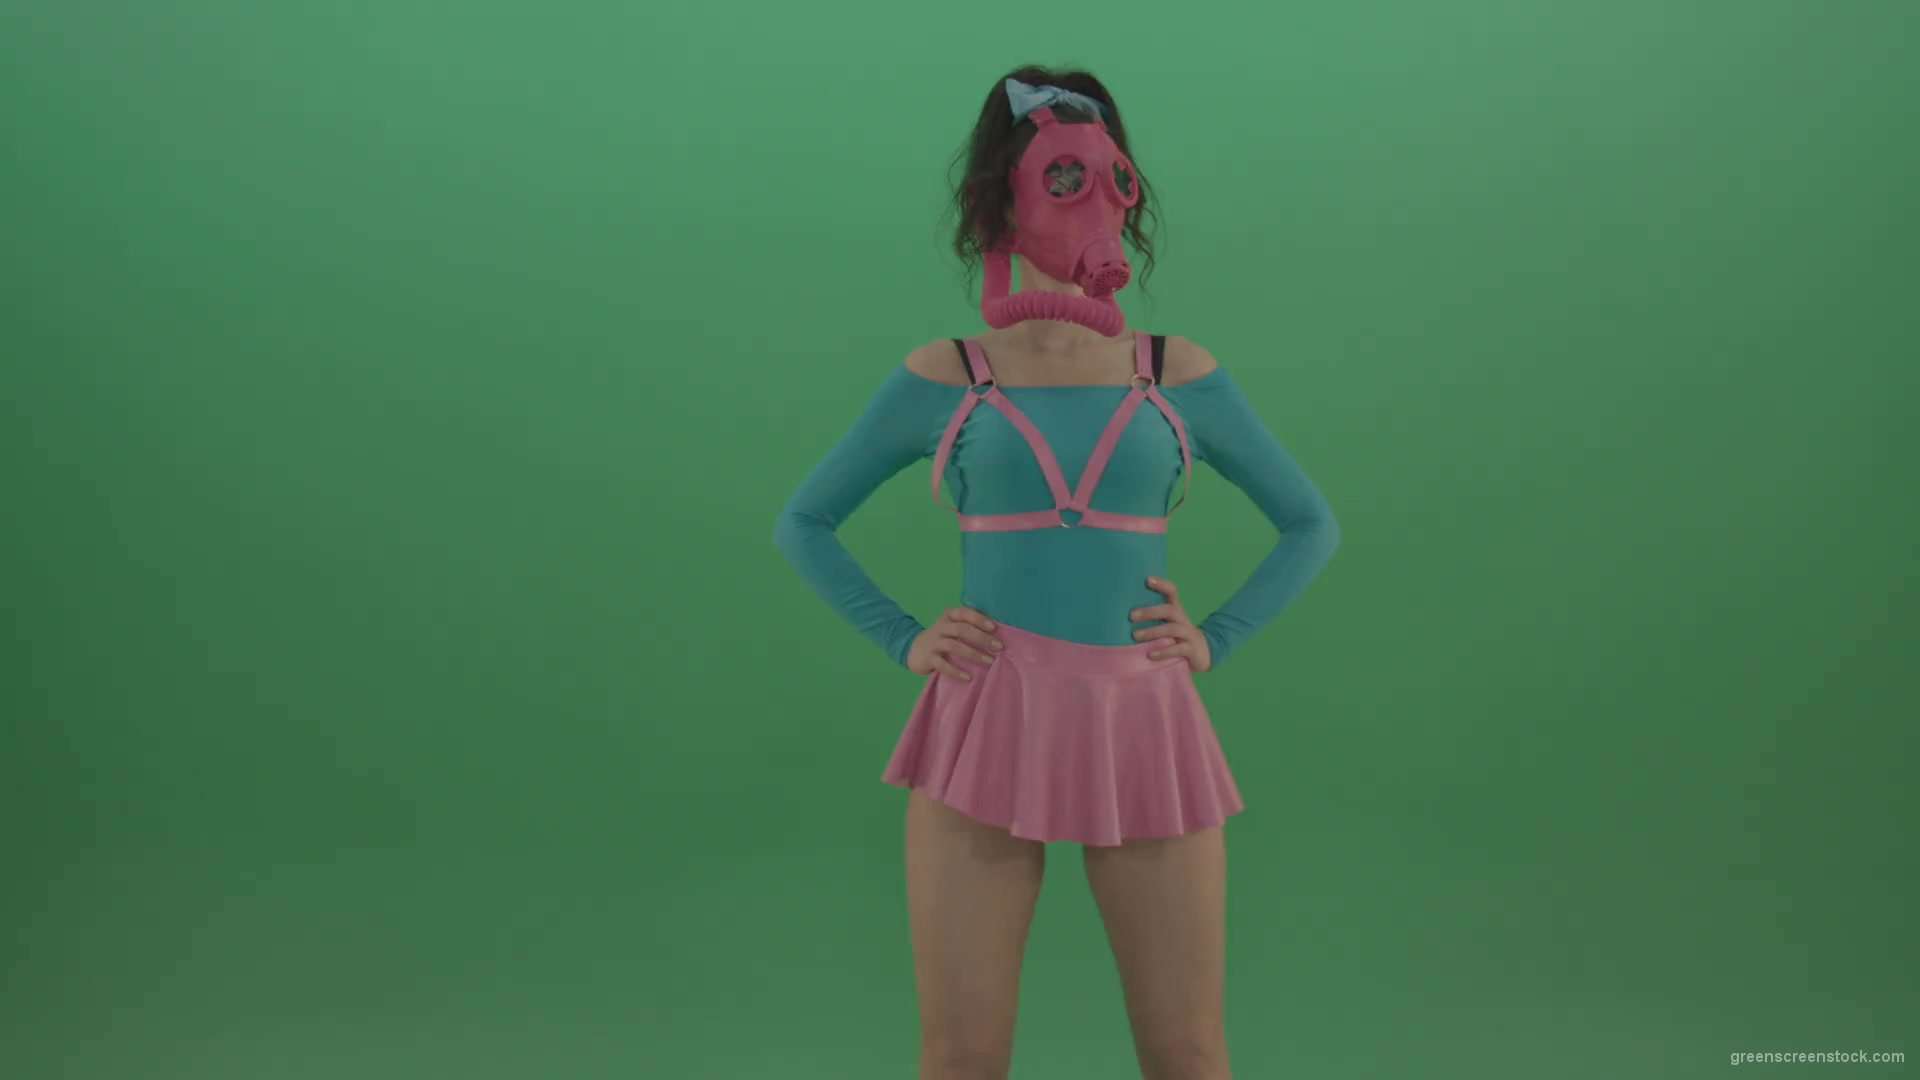 Go-Go-Dancing-Woman-in-Pink-Gas-Mask-sexy-moving-on-green-screen-4K-Video-Footage-1920_001 Green Screen Stock